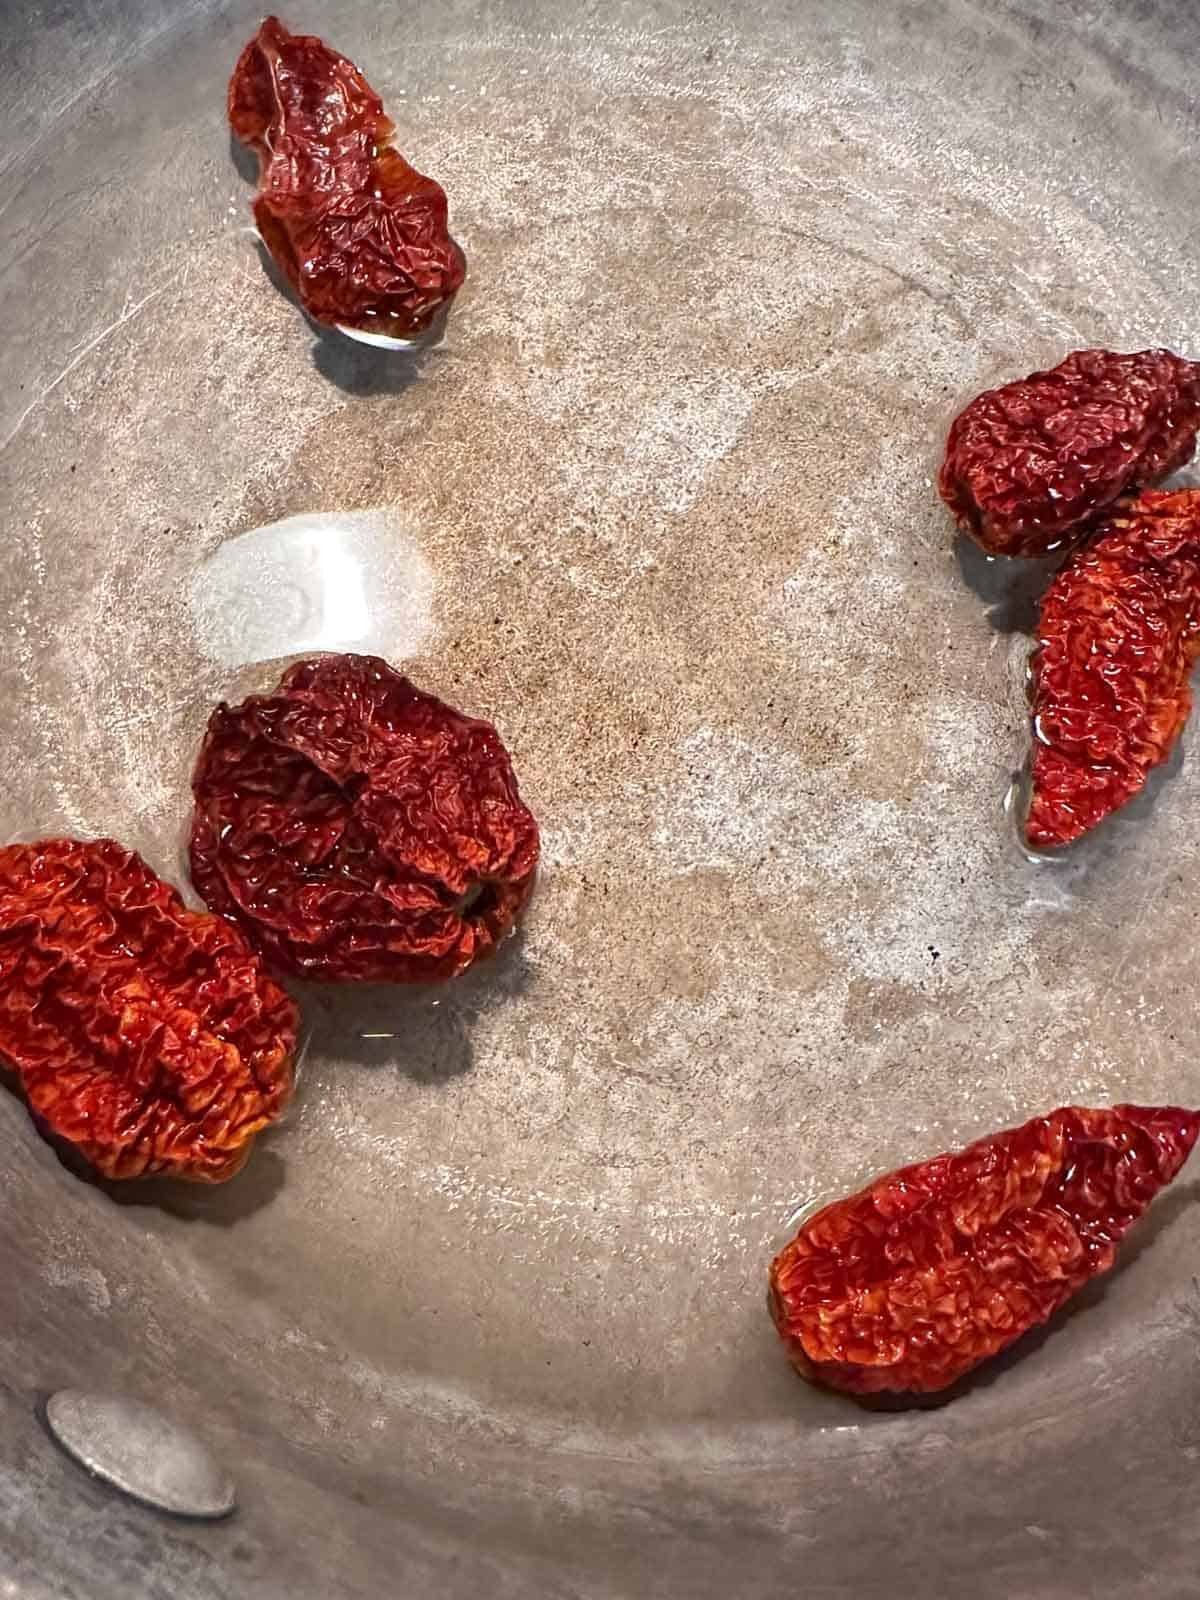 Dried ghost peppers being rehydrated in warm water in a saucepan.